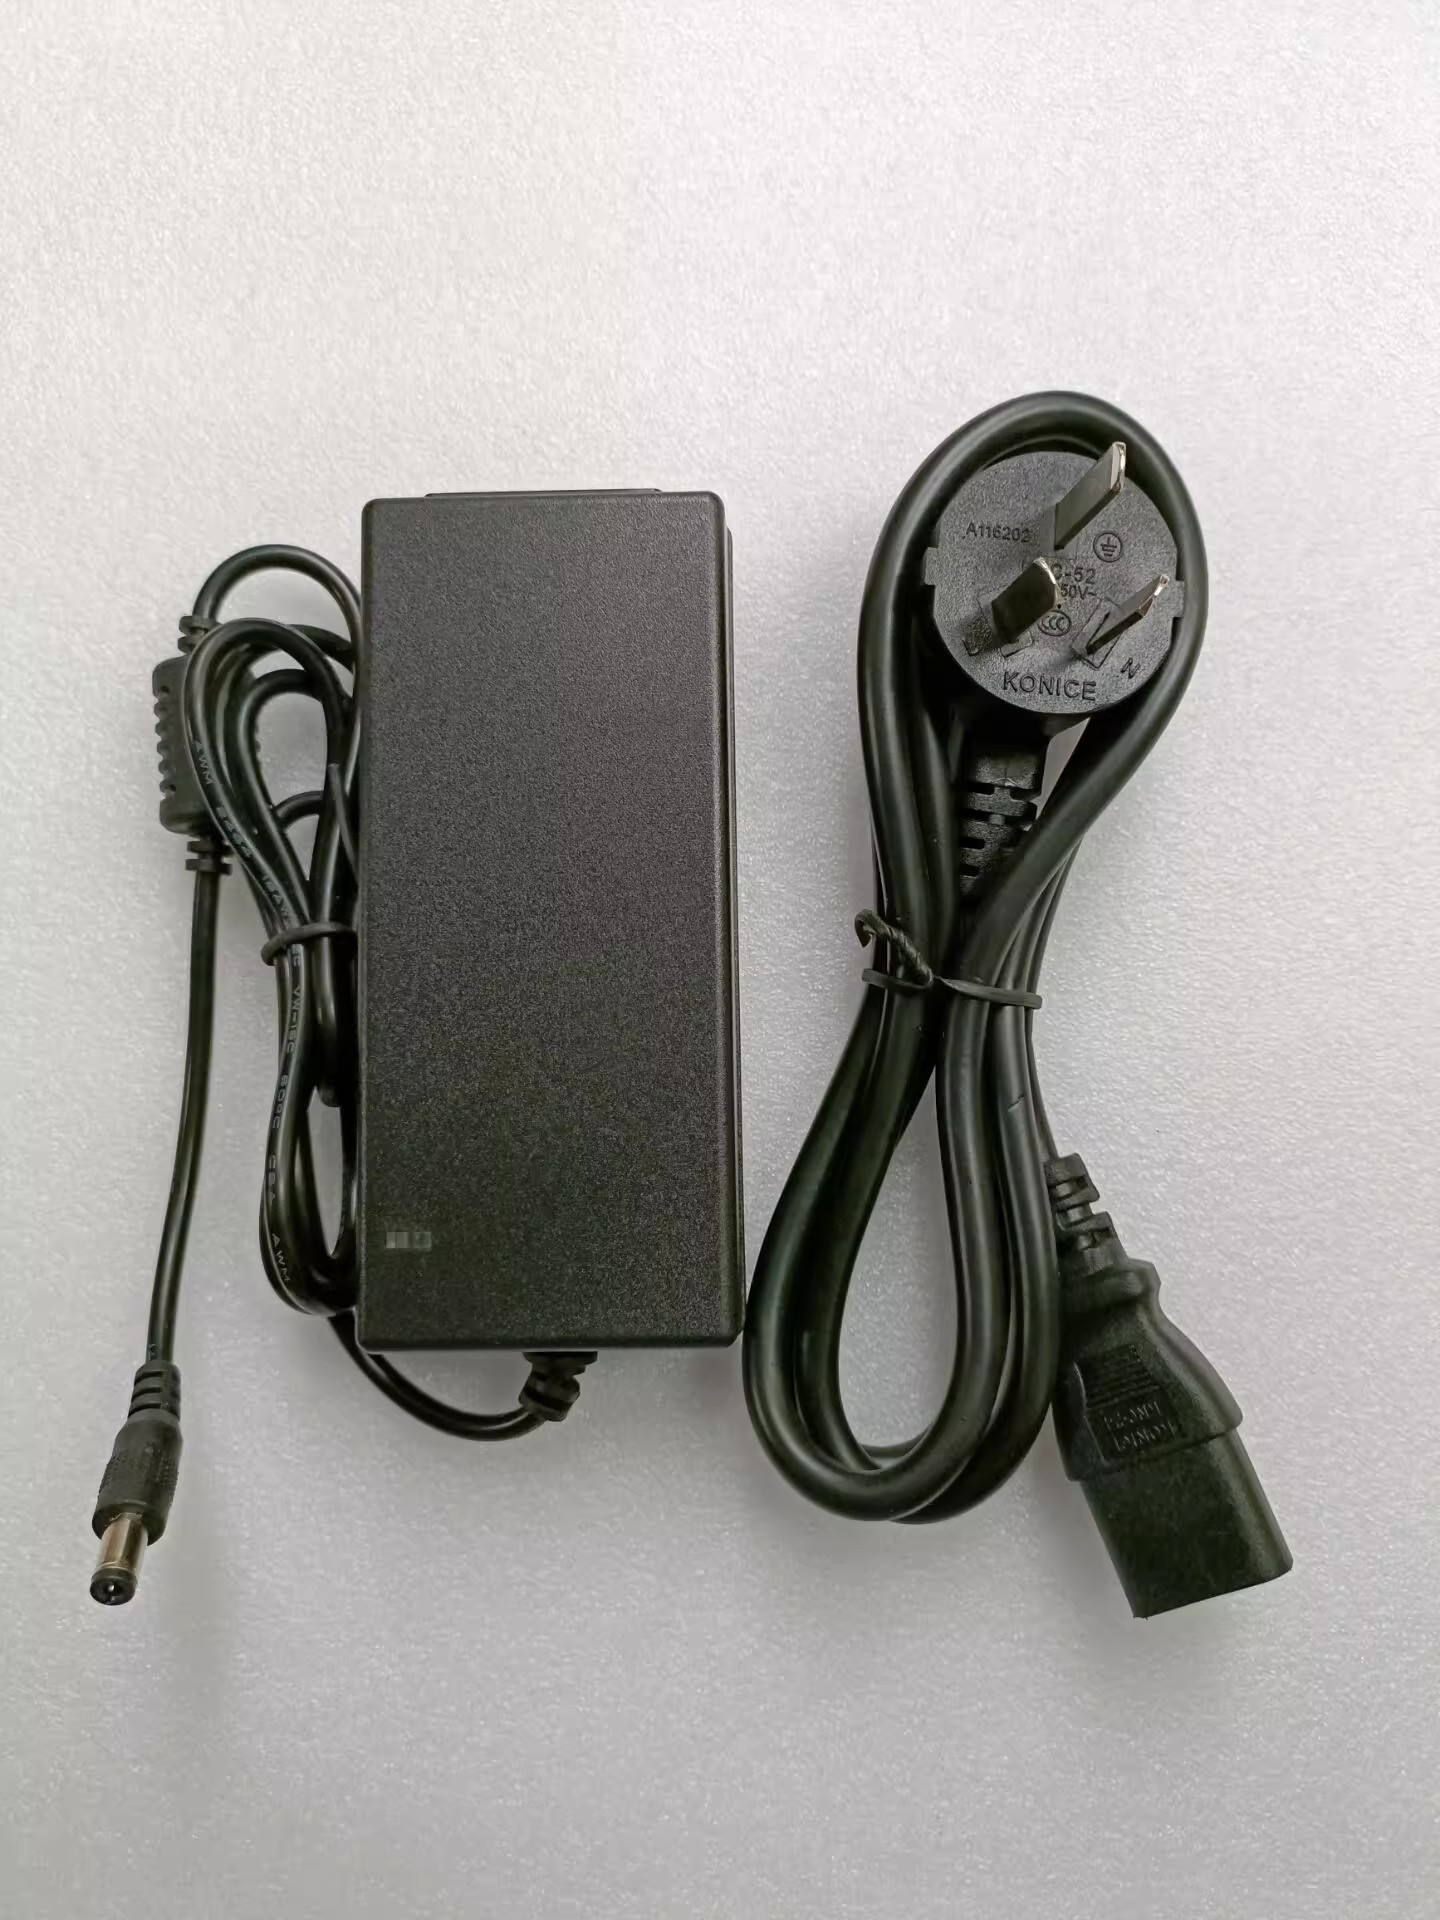 *Brand NEW*POWER 15V 6A AC DC ADAPTHE AD-S1560B POWER Supply